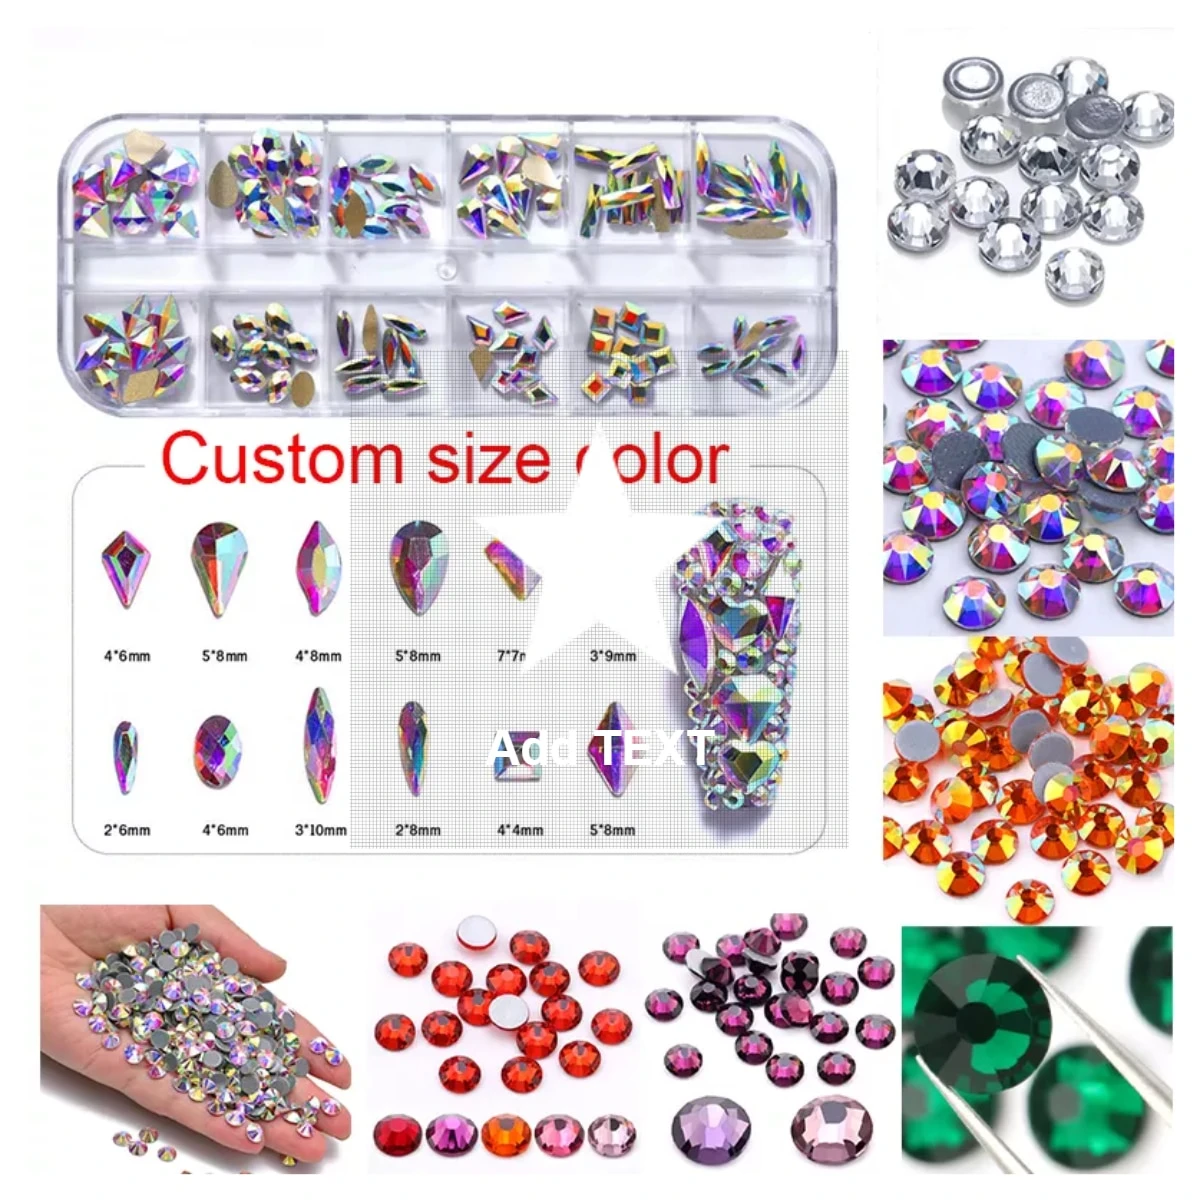 SS34DMC Patch Rhinestone Crystal Iron On Thermoset Stone For Clothes Bag Design